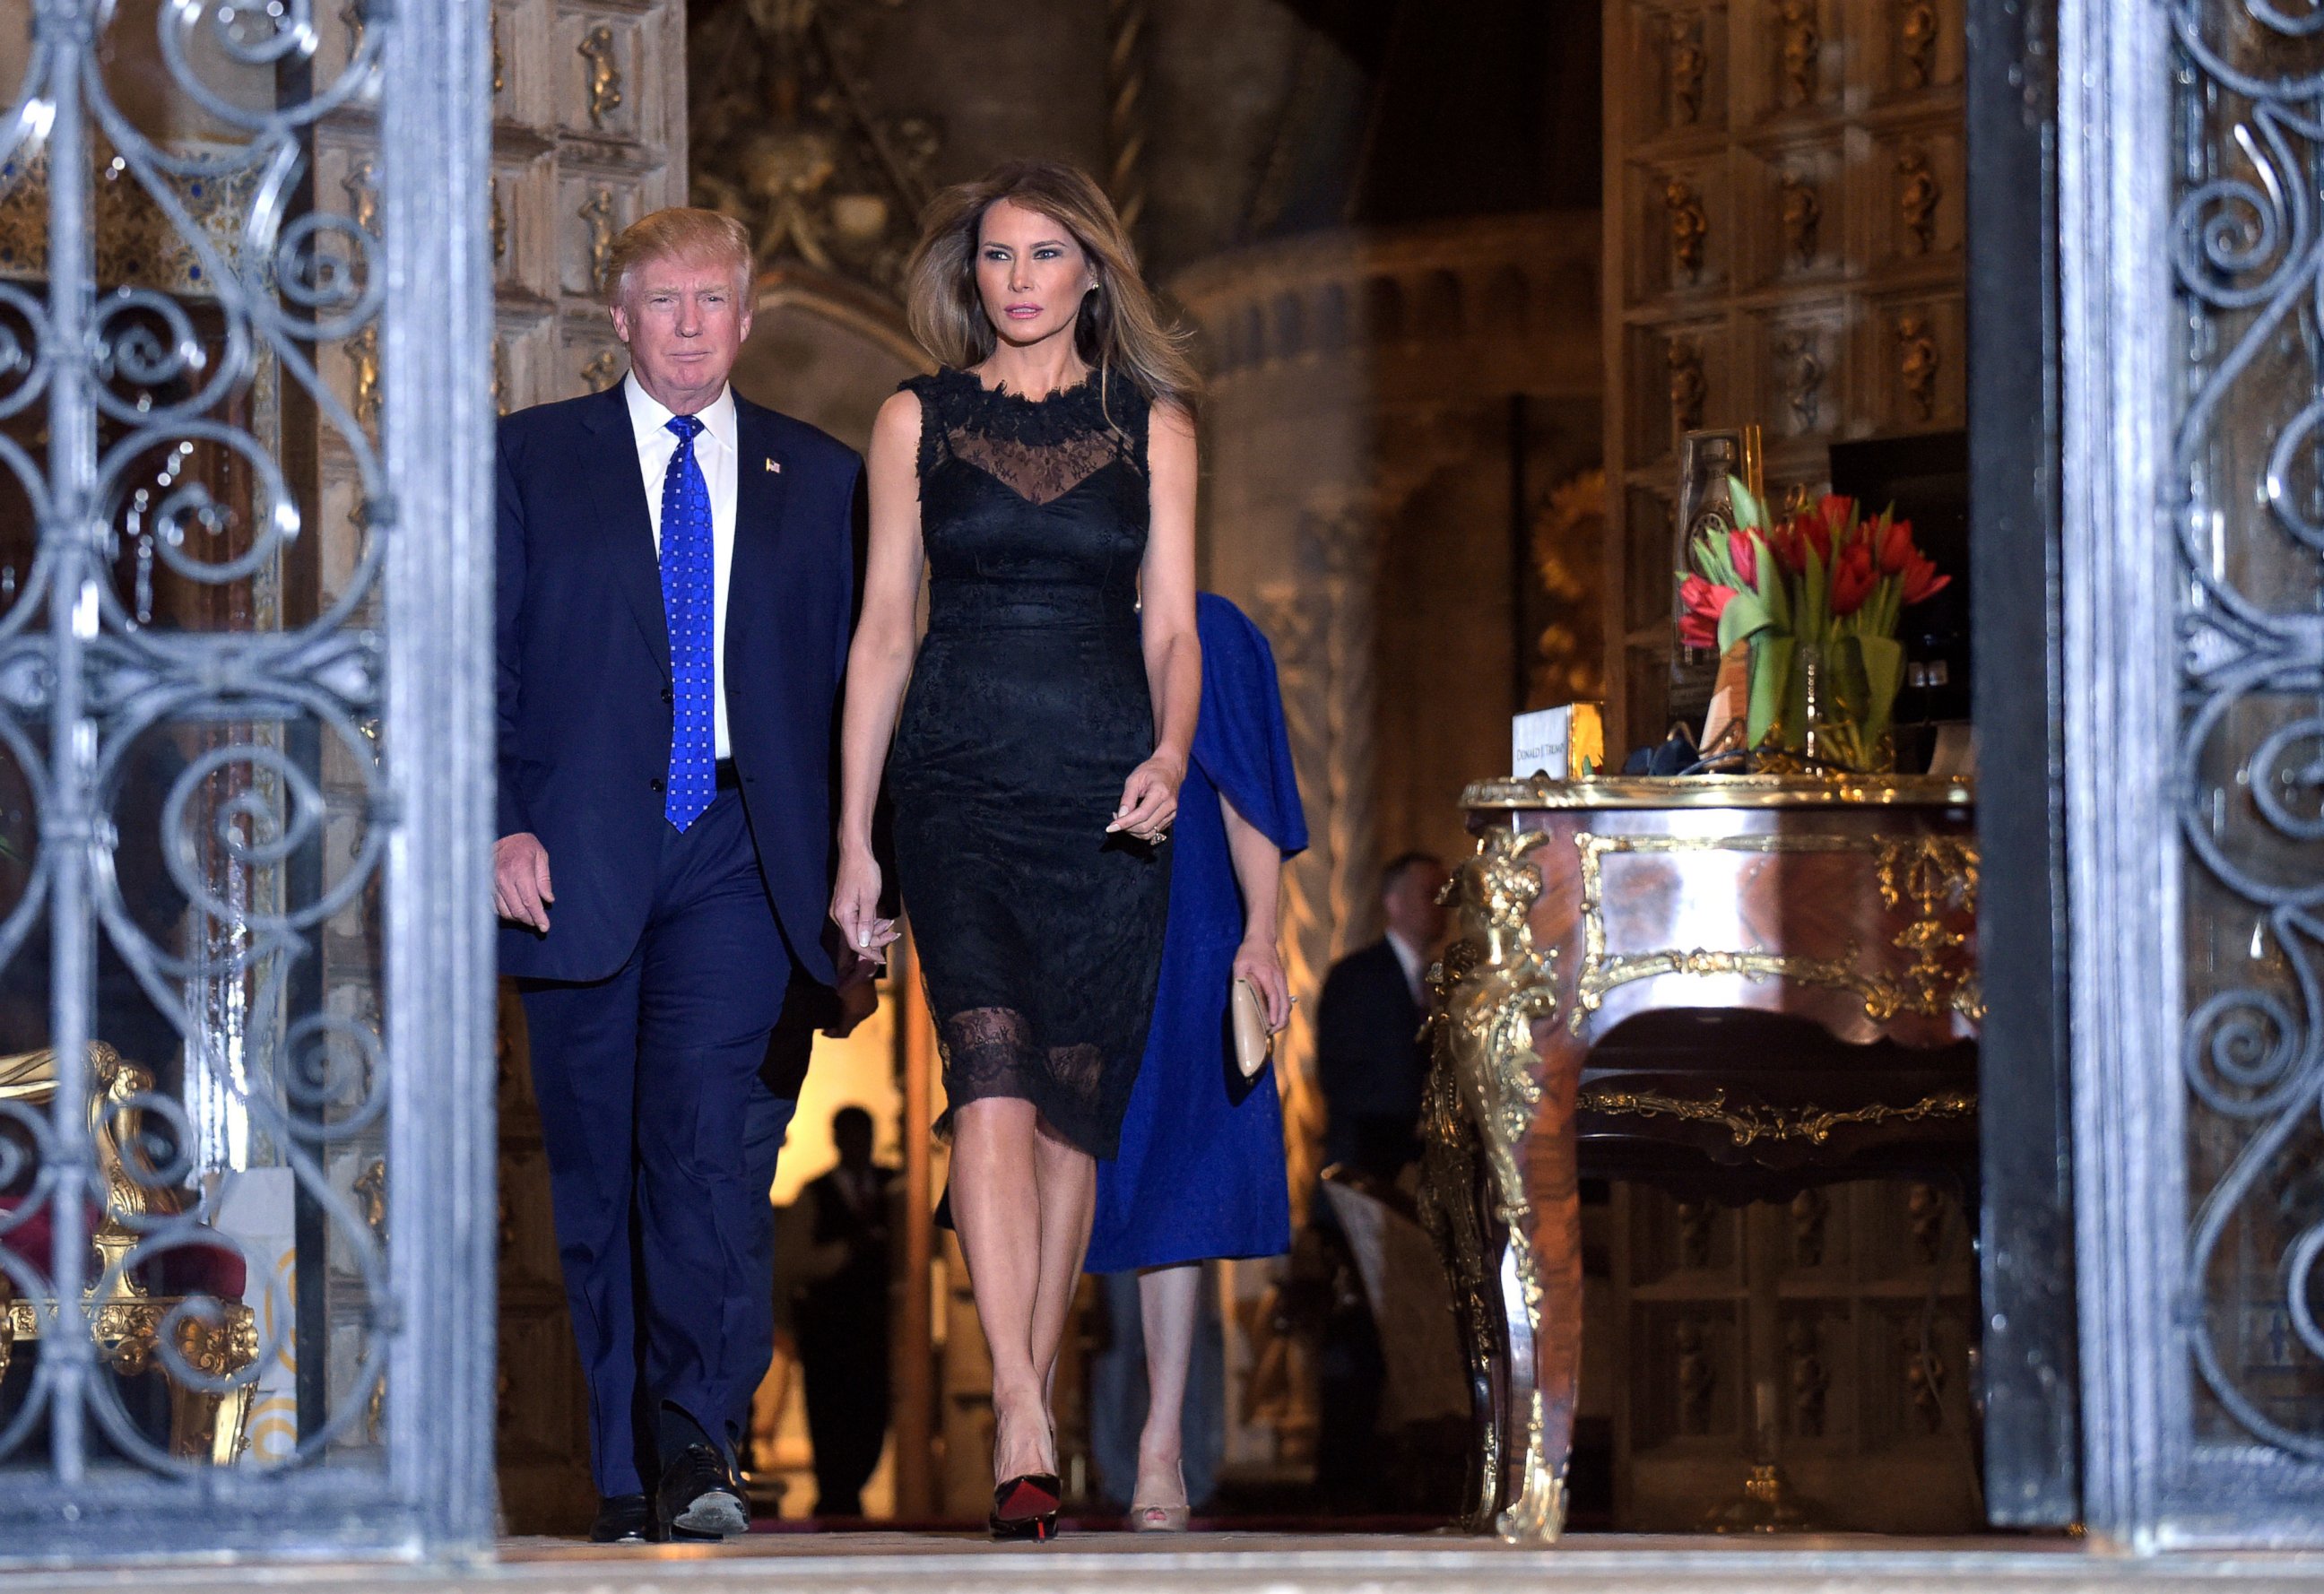 PHOTO: President Donald Trump and first lady Melania Trump are photographed at Mar-a-Lago in Palm Beach, Fla., Feb. 11, 2017.